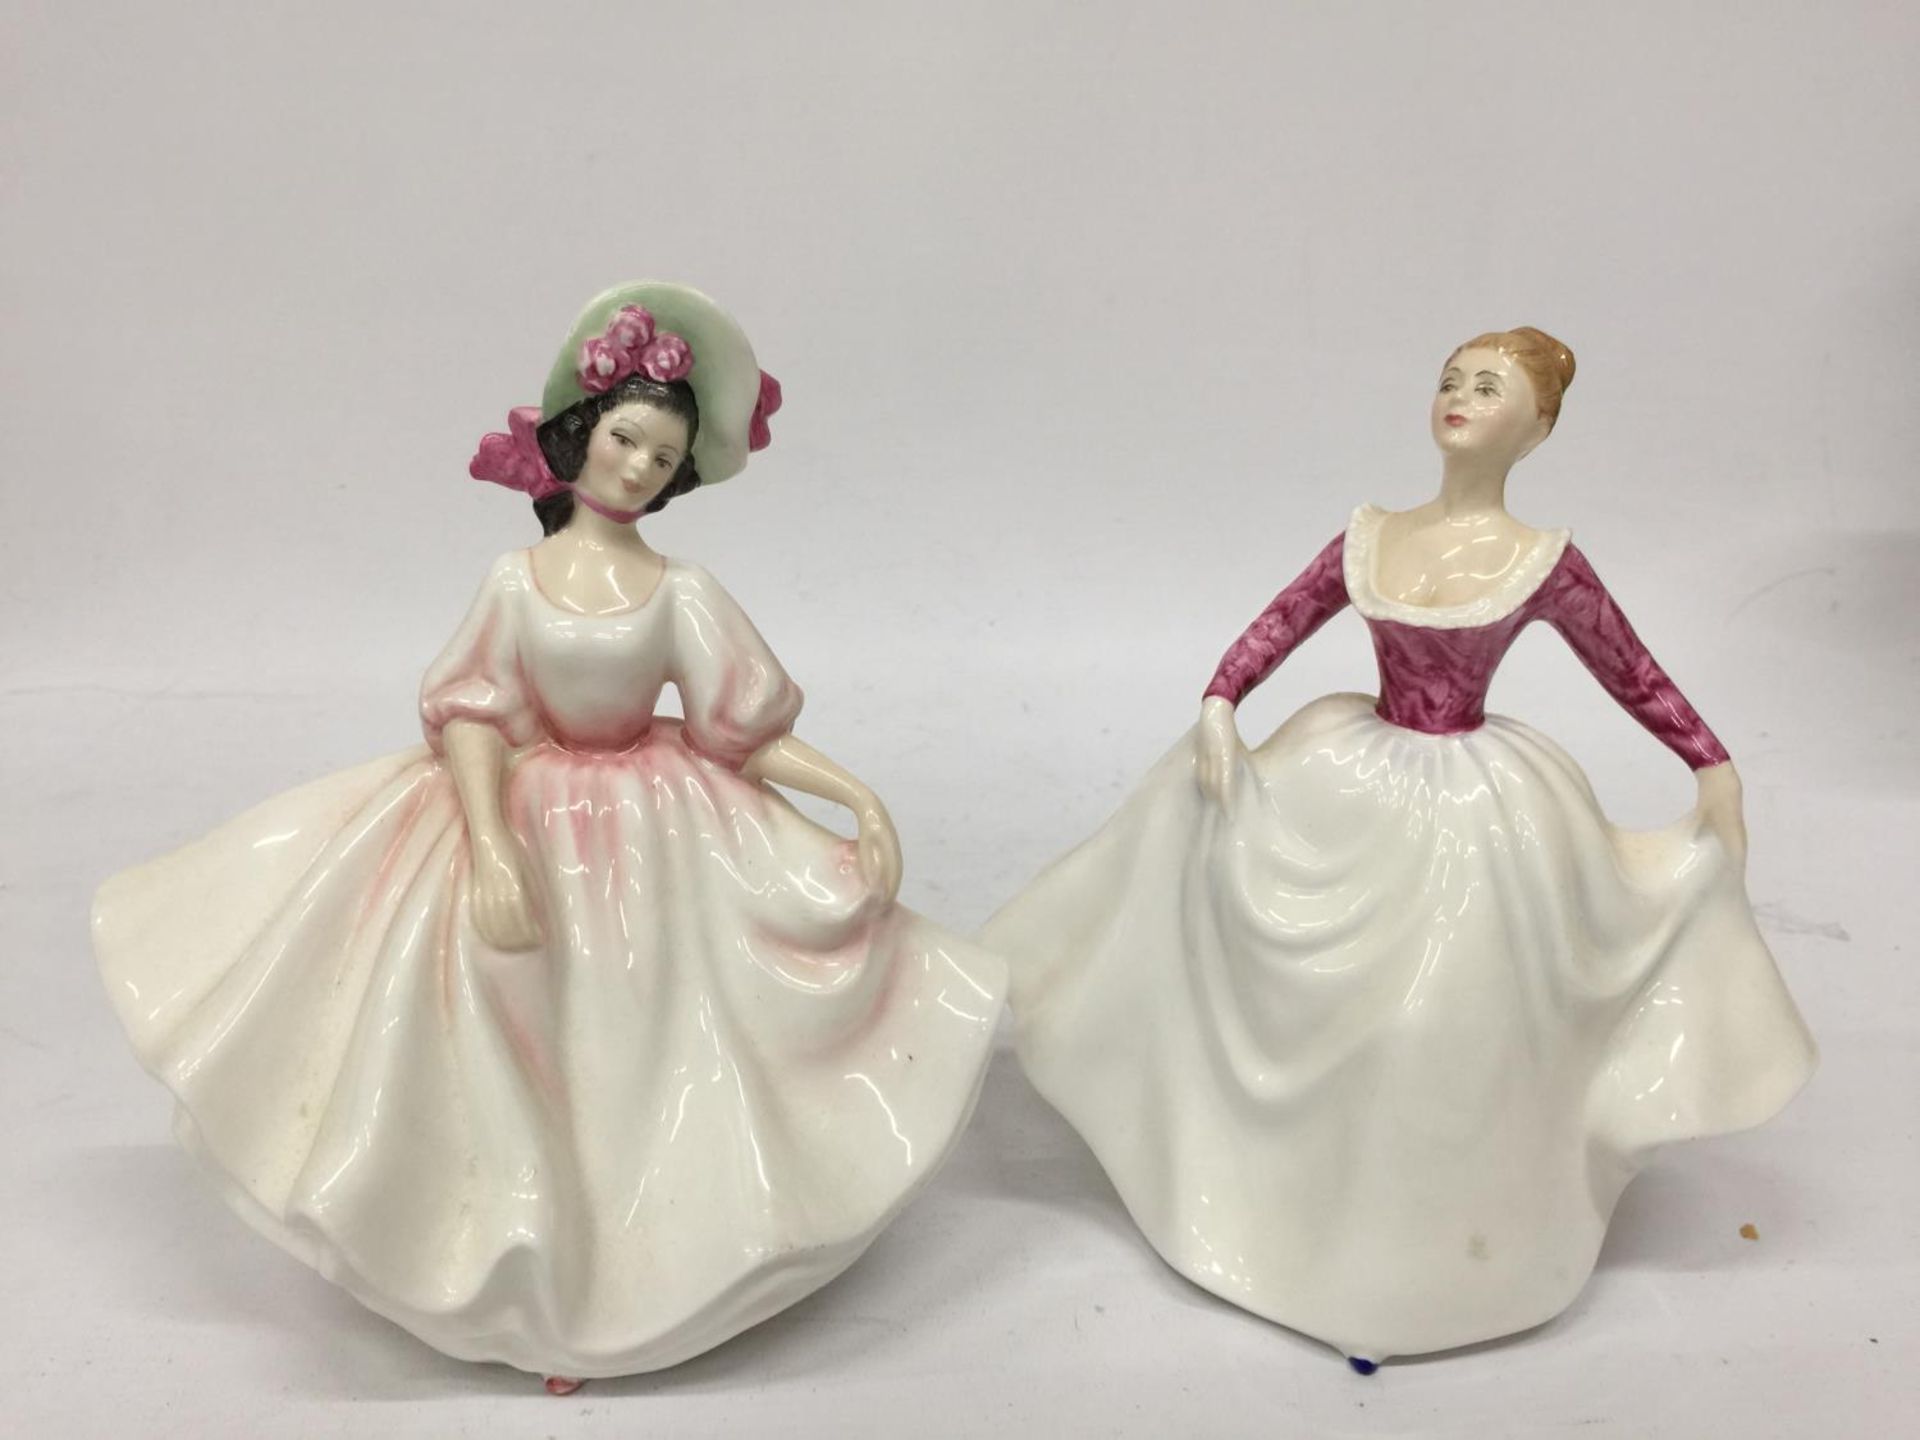 TWO ROYAL DOULTON LADIES - "LISA" AND "SUNDAY BEST" - 20CM AND 19.5 CM